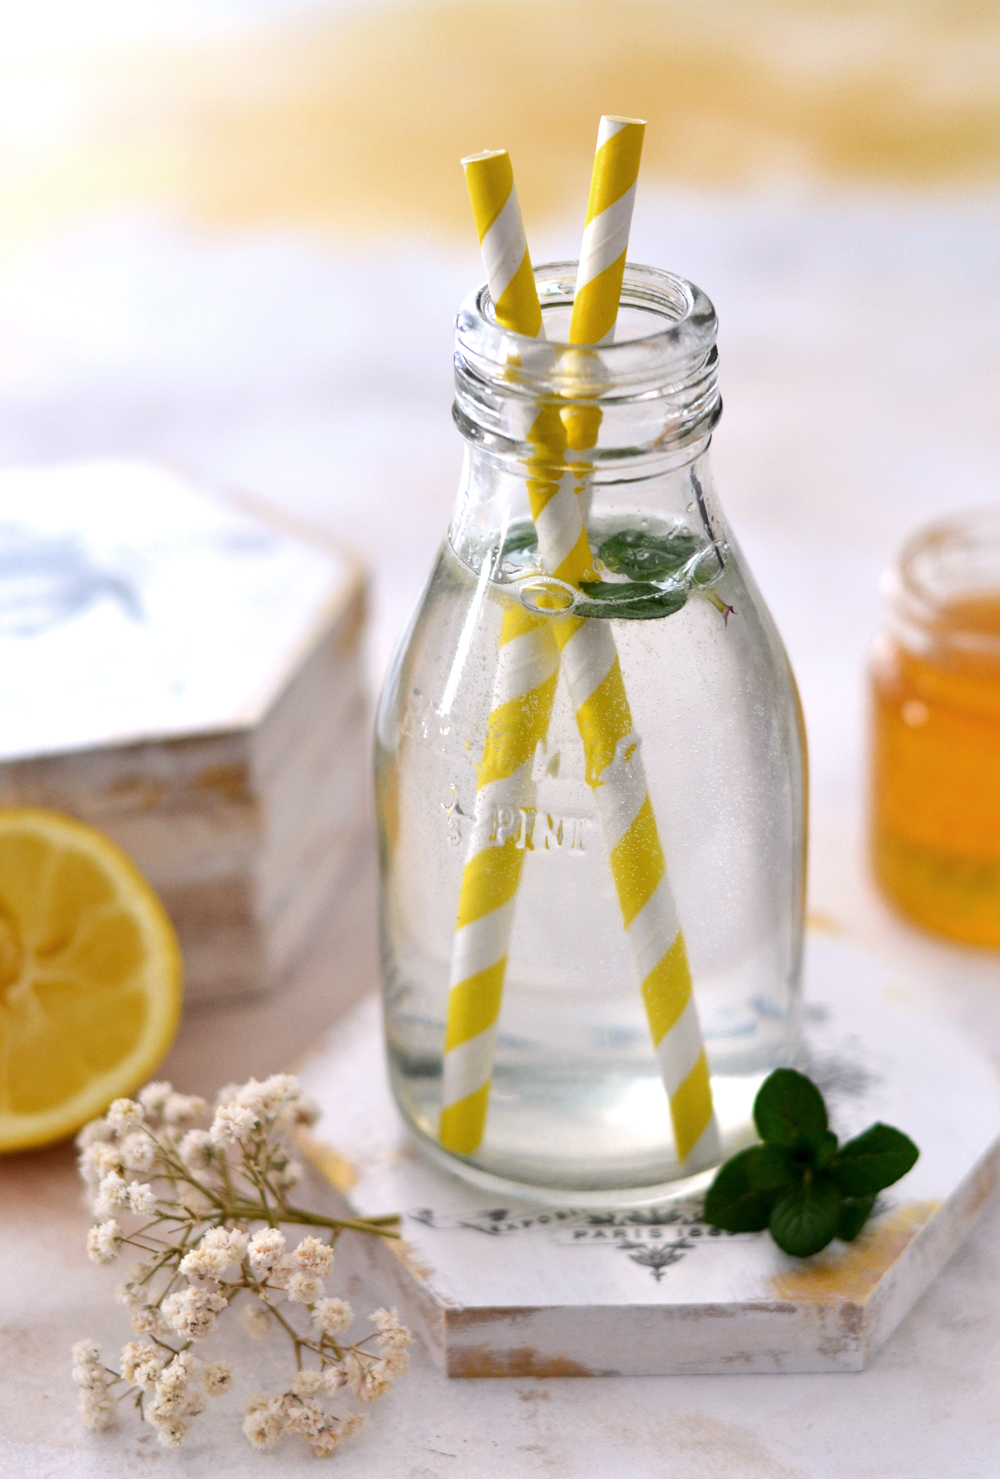 bottle with two yellow striped straws